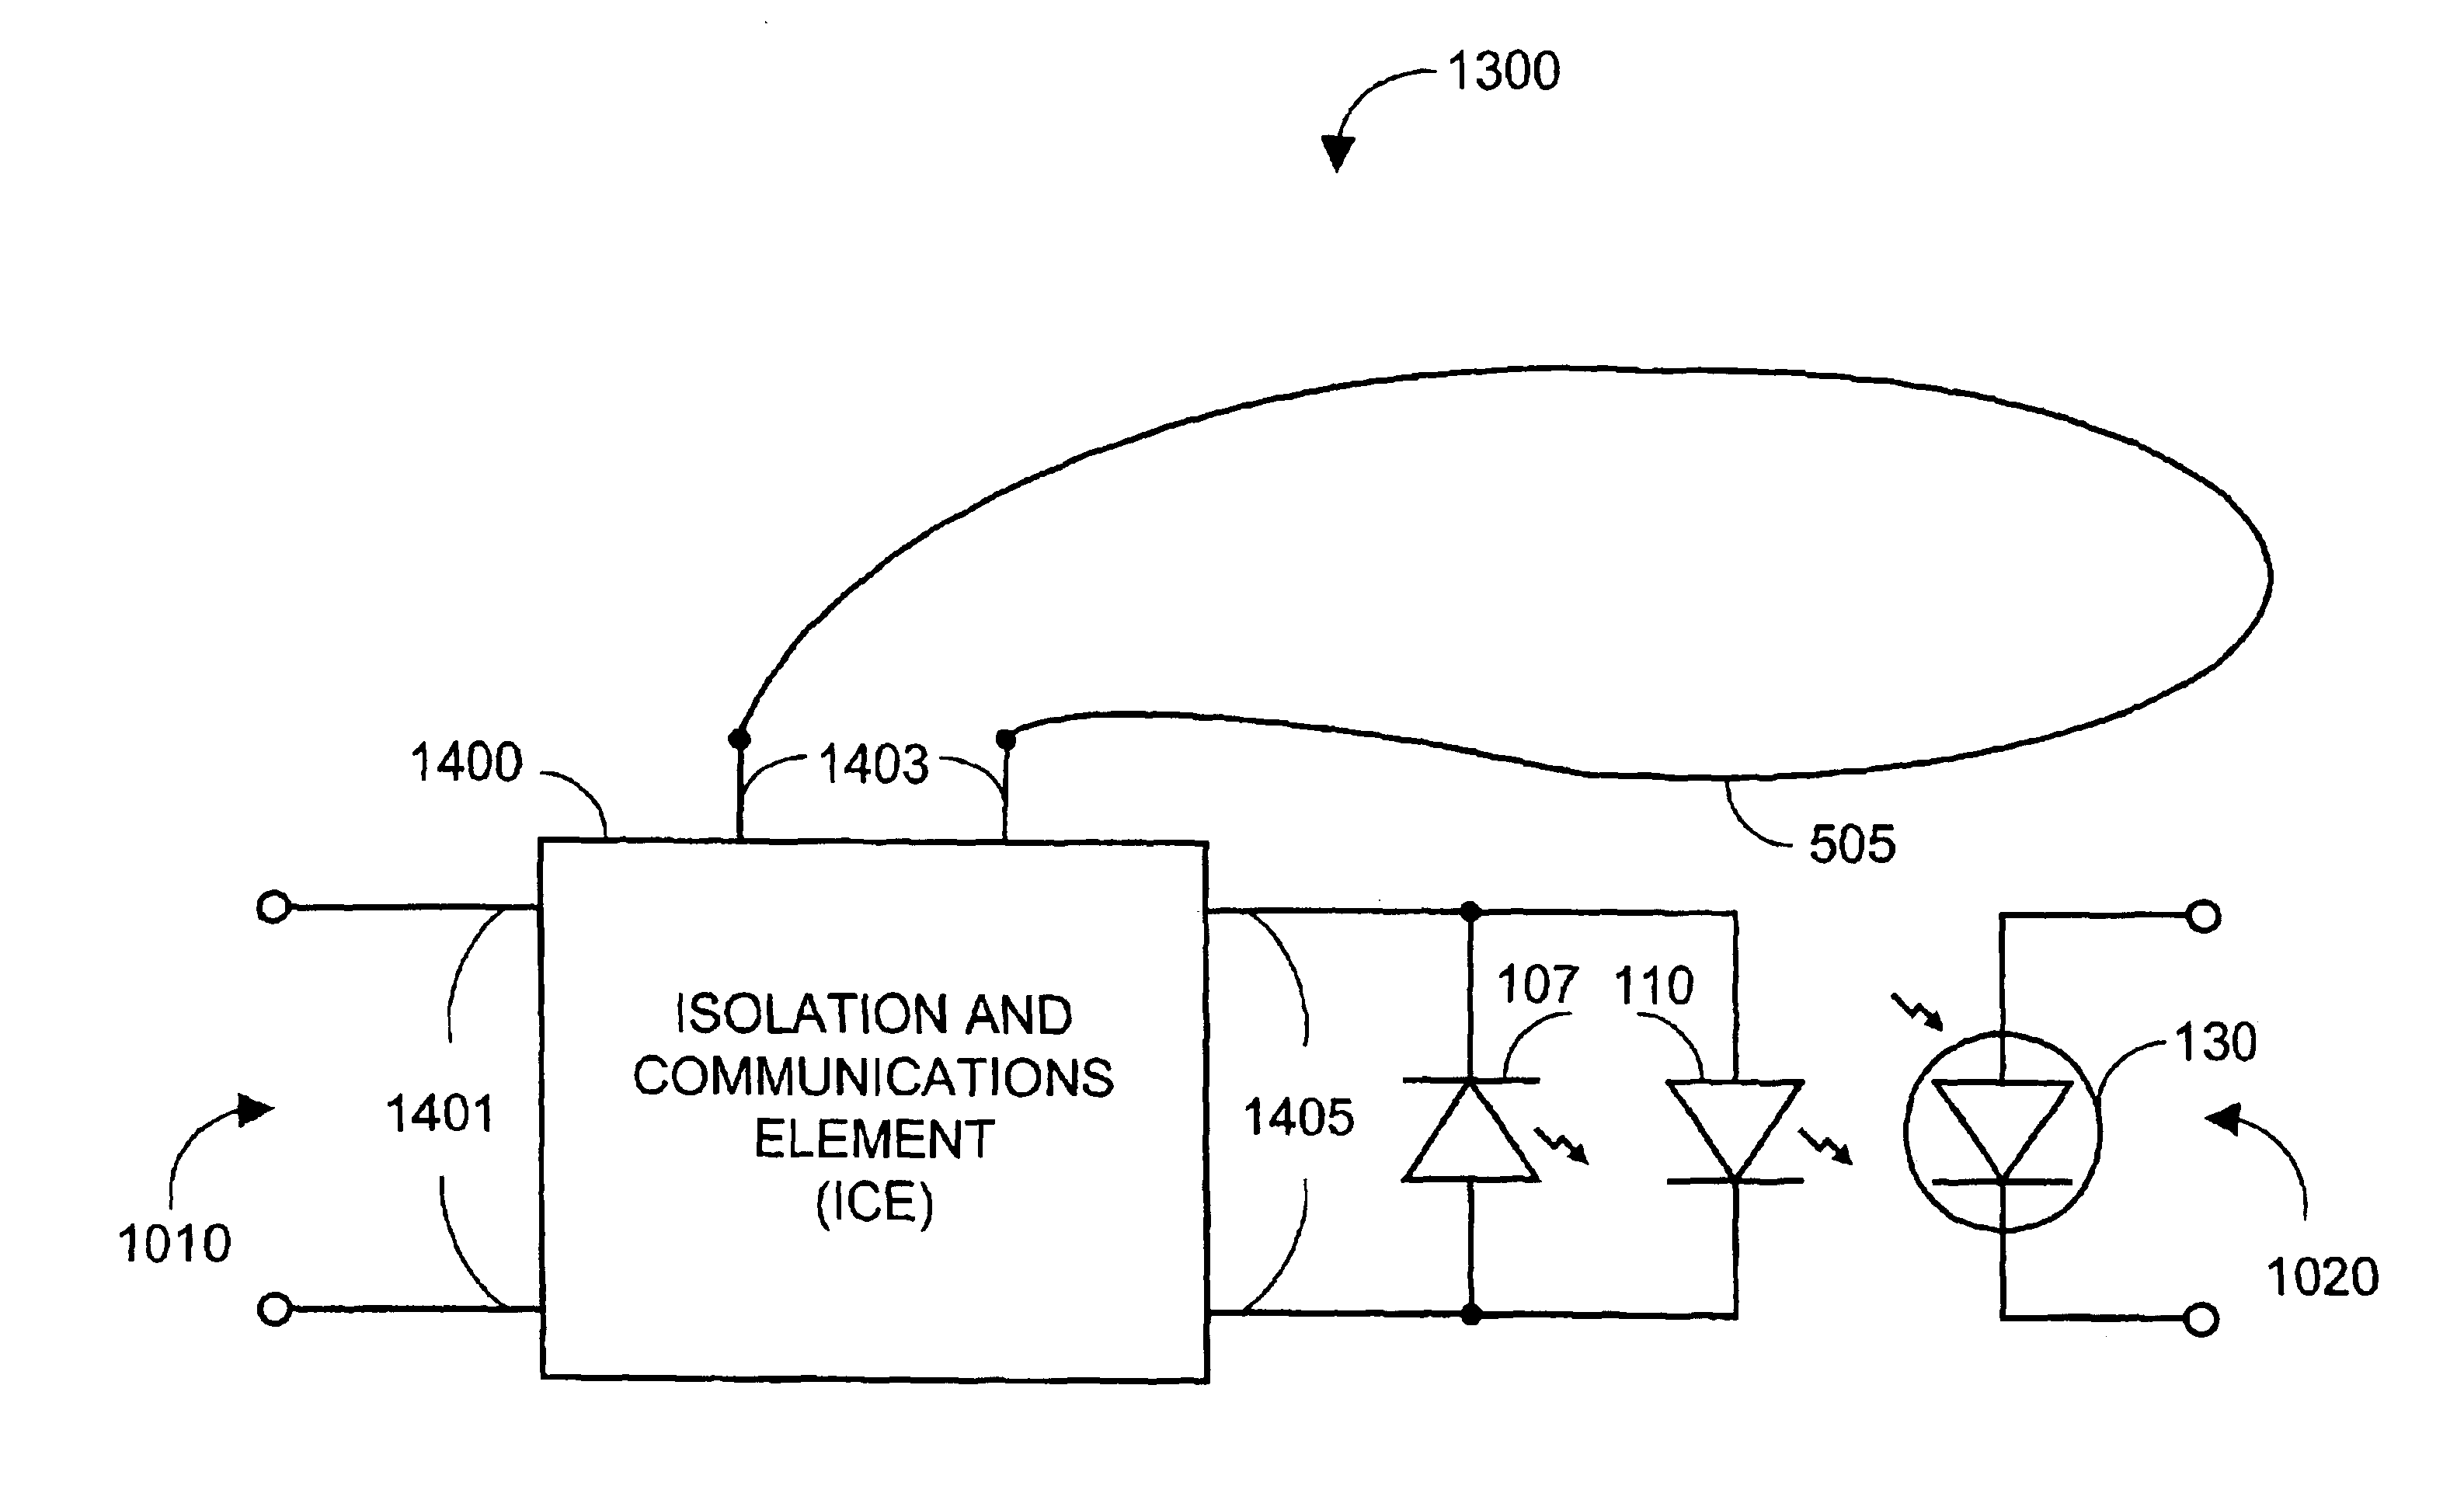 Isolation and communication element for a resposable pulse oximetry sensor